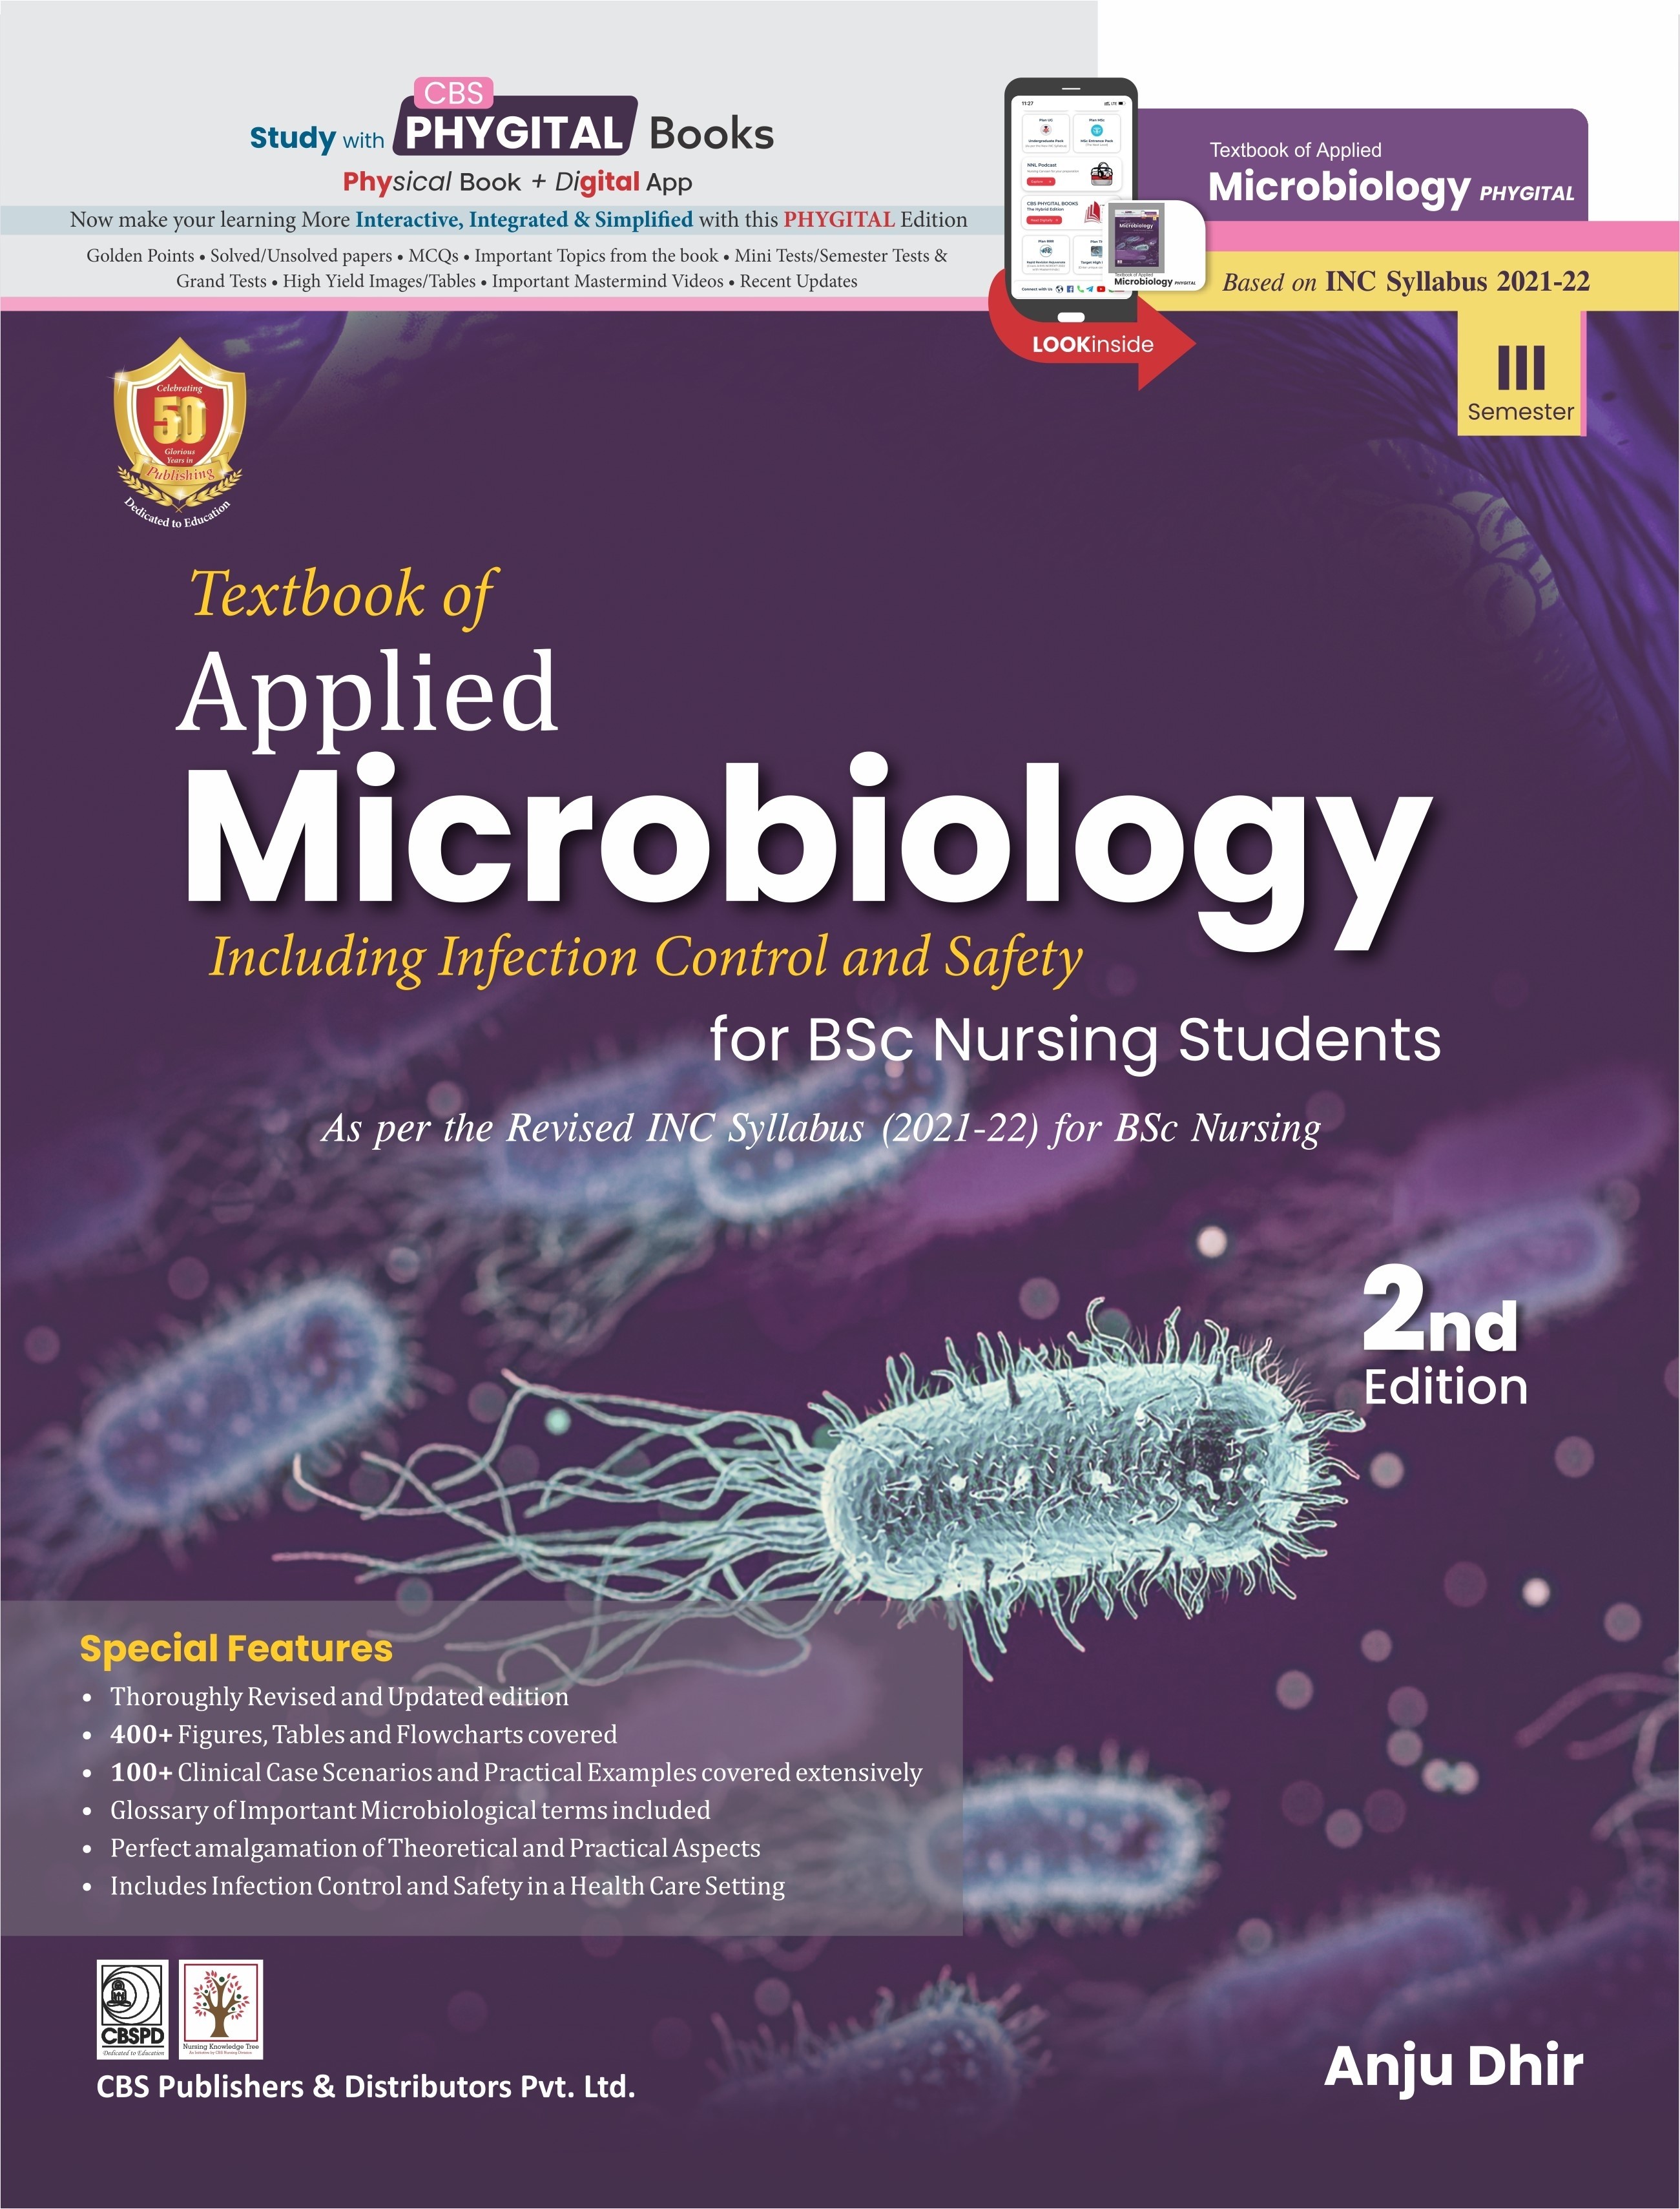 Textbook of  Applied Microbiology  Including Infection Control and Safety  for BSc Nursing Students As per the Revised INC Syllabus (2021-22) for BSc Nursing